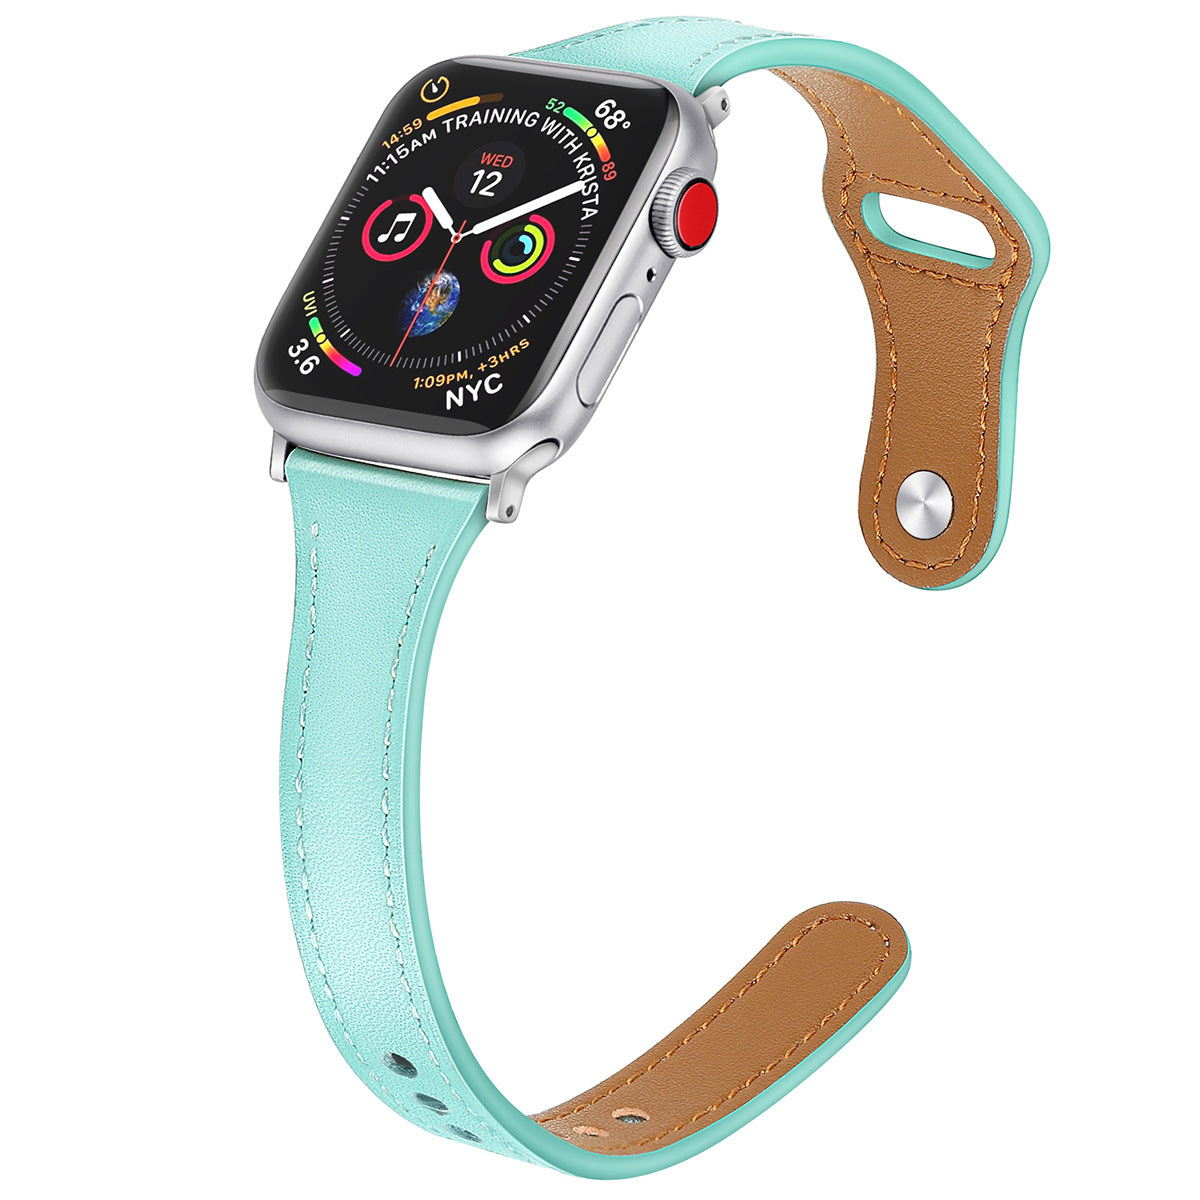 Suitable for Apple watches with small waist and leather strap, ultra-fine and minimalist fit